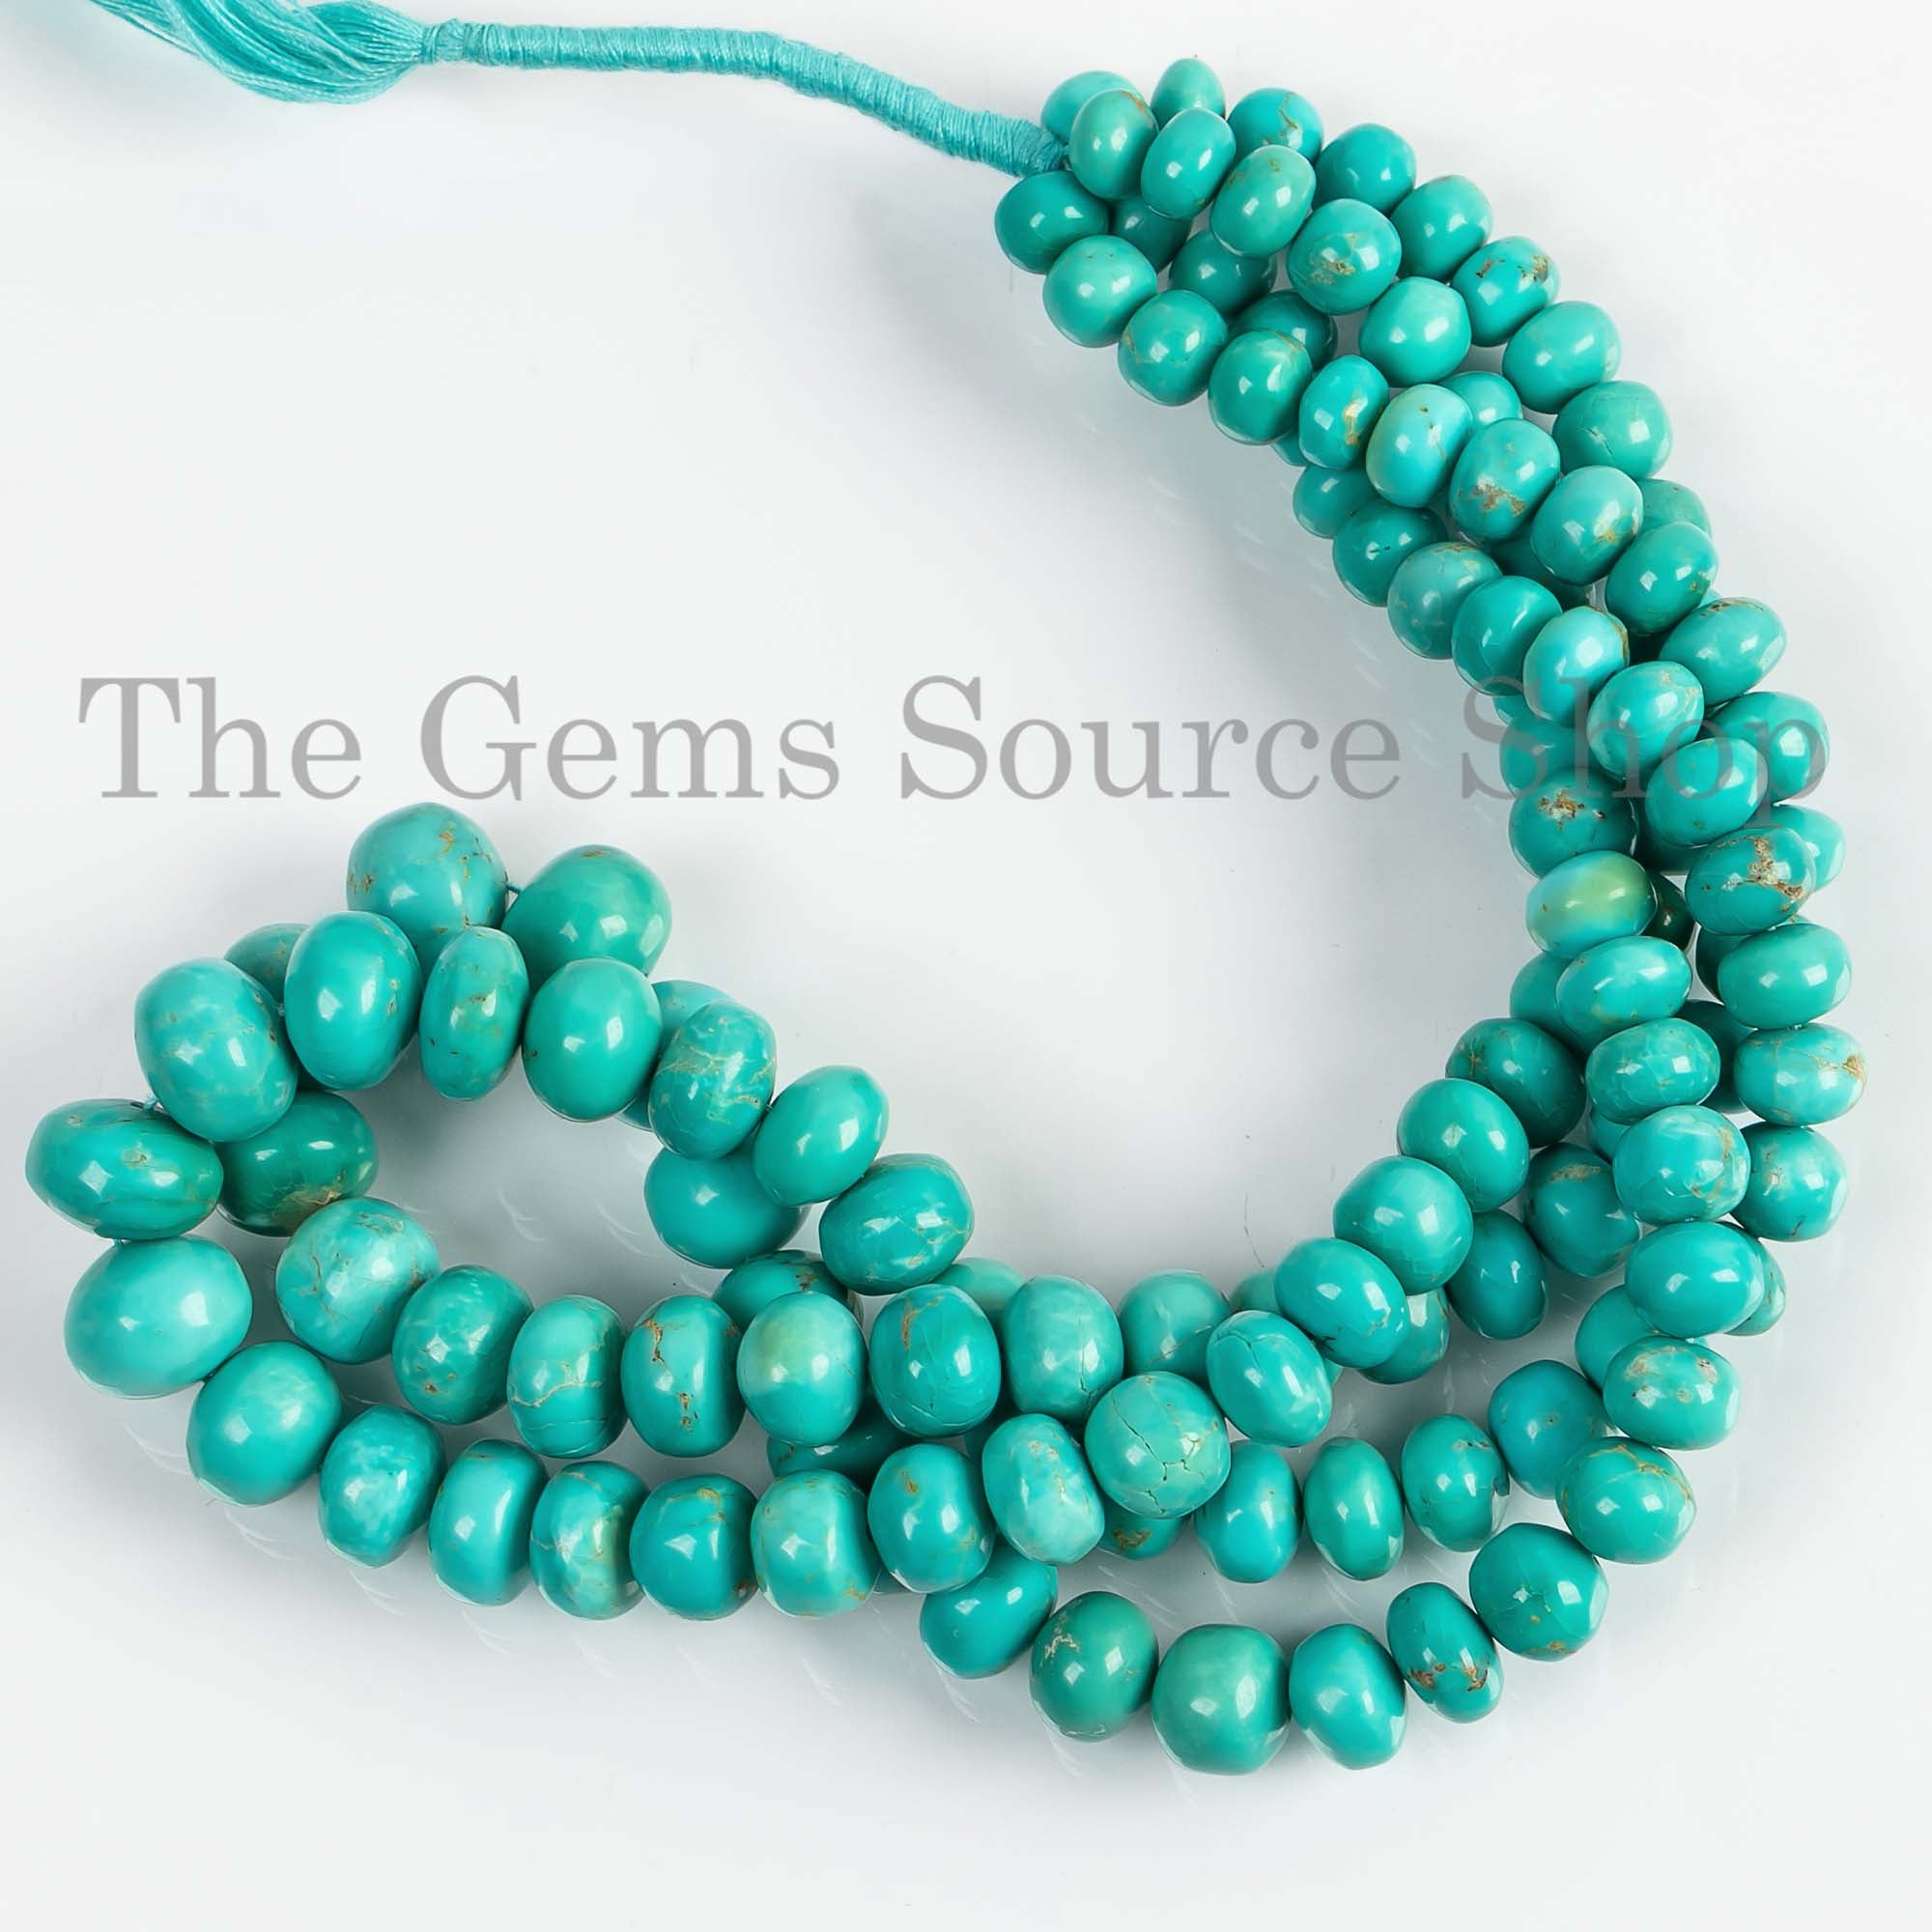 7.5-13.5mm Turquoise Gemstone Rondelle Beads, Natural Turquoise Beads, Smooth Wholesale Beads, Craft Loose Beads